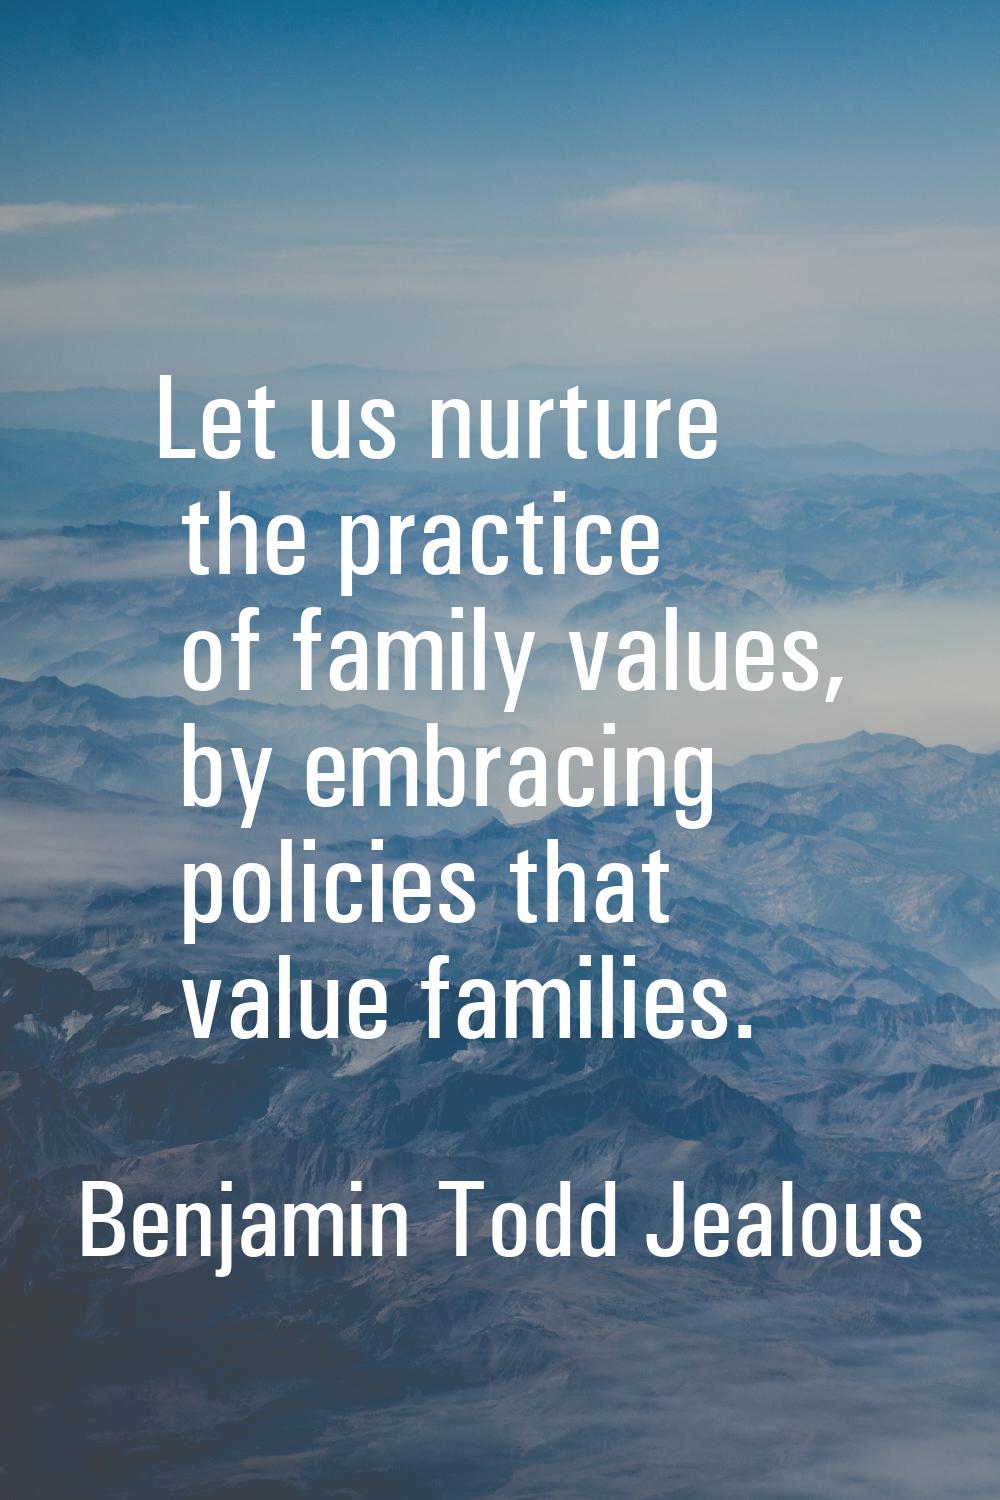 Let us nurture the practice of family values, by embracing policies that value families.